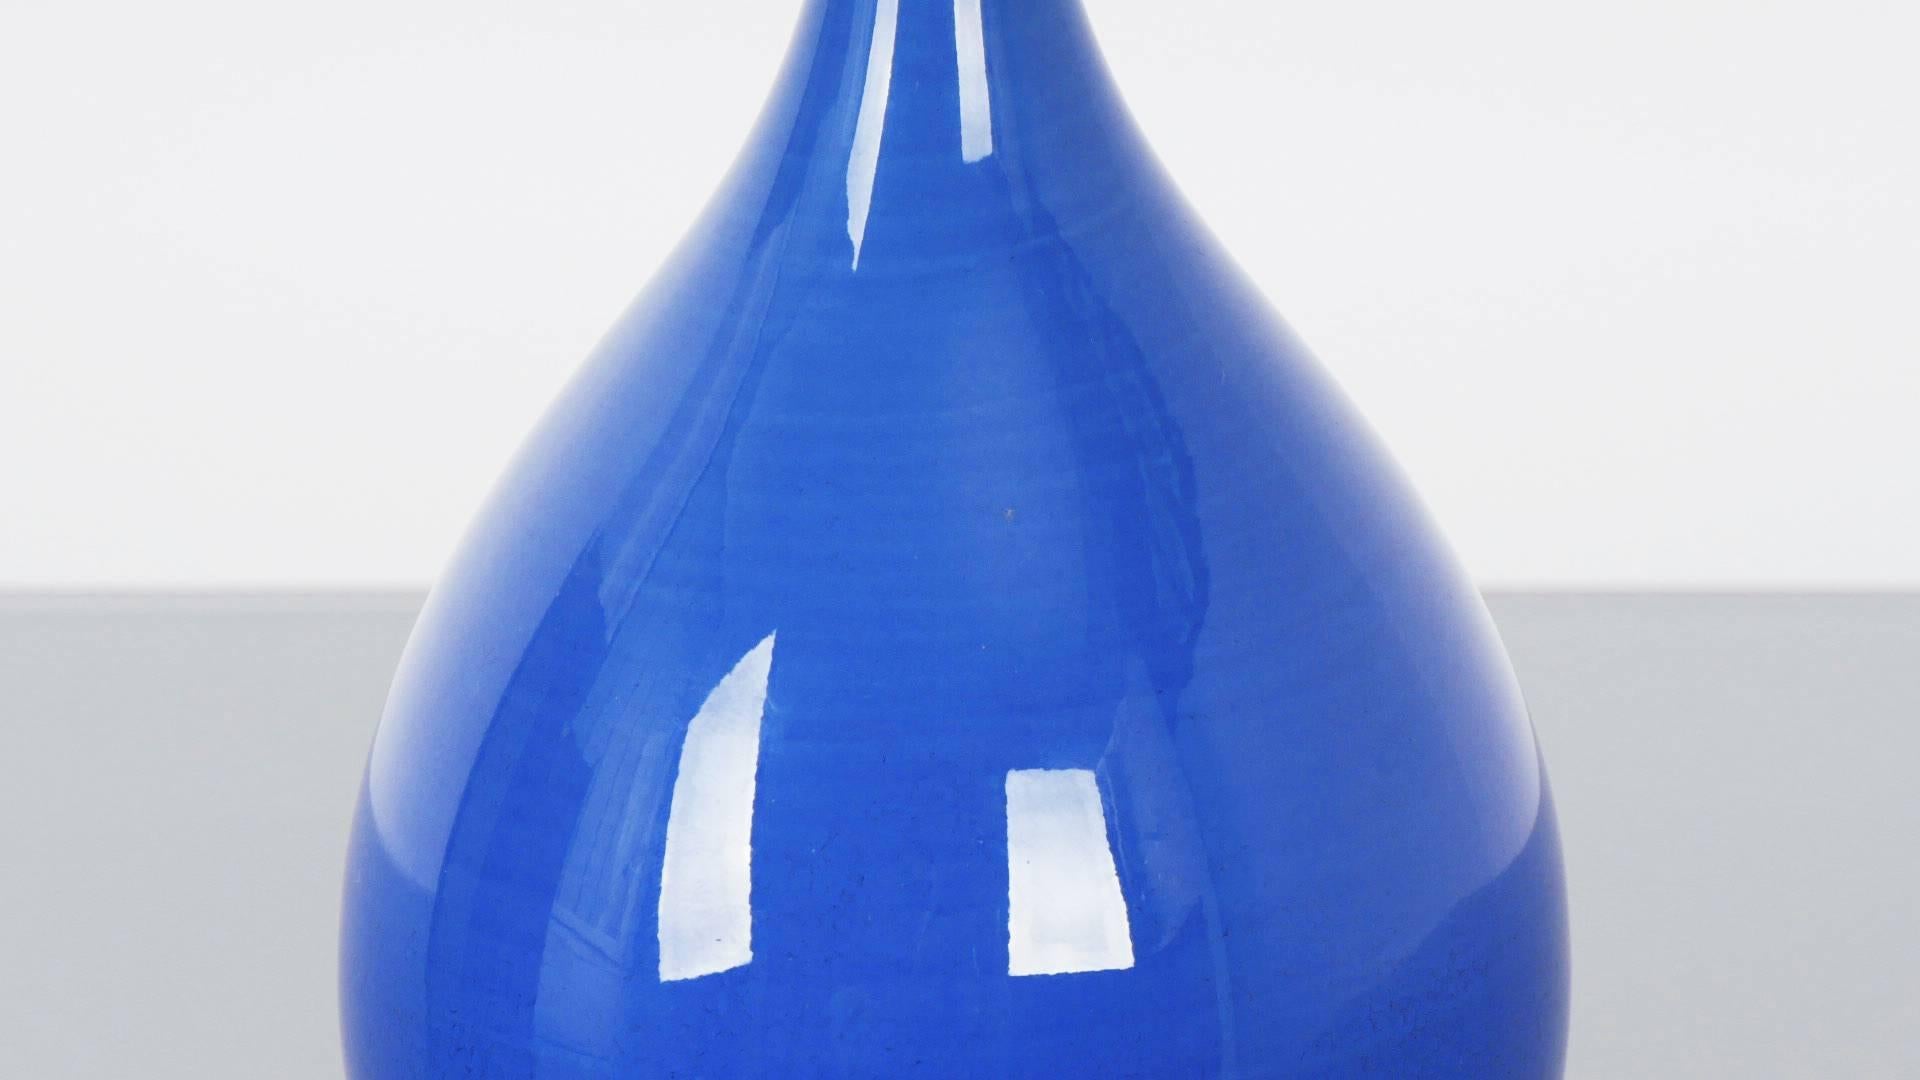 Carl Harry stalhane elegant drop vase in a deep blue glaze. The application of the glaze is turning around the piece from the top to the bottom and adds a beautiful and discrete decor to the piece. Signed.